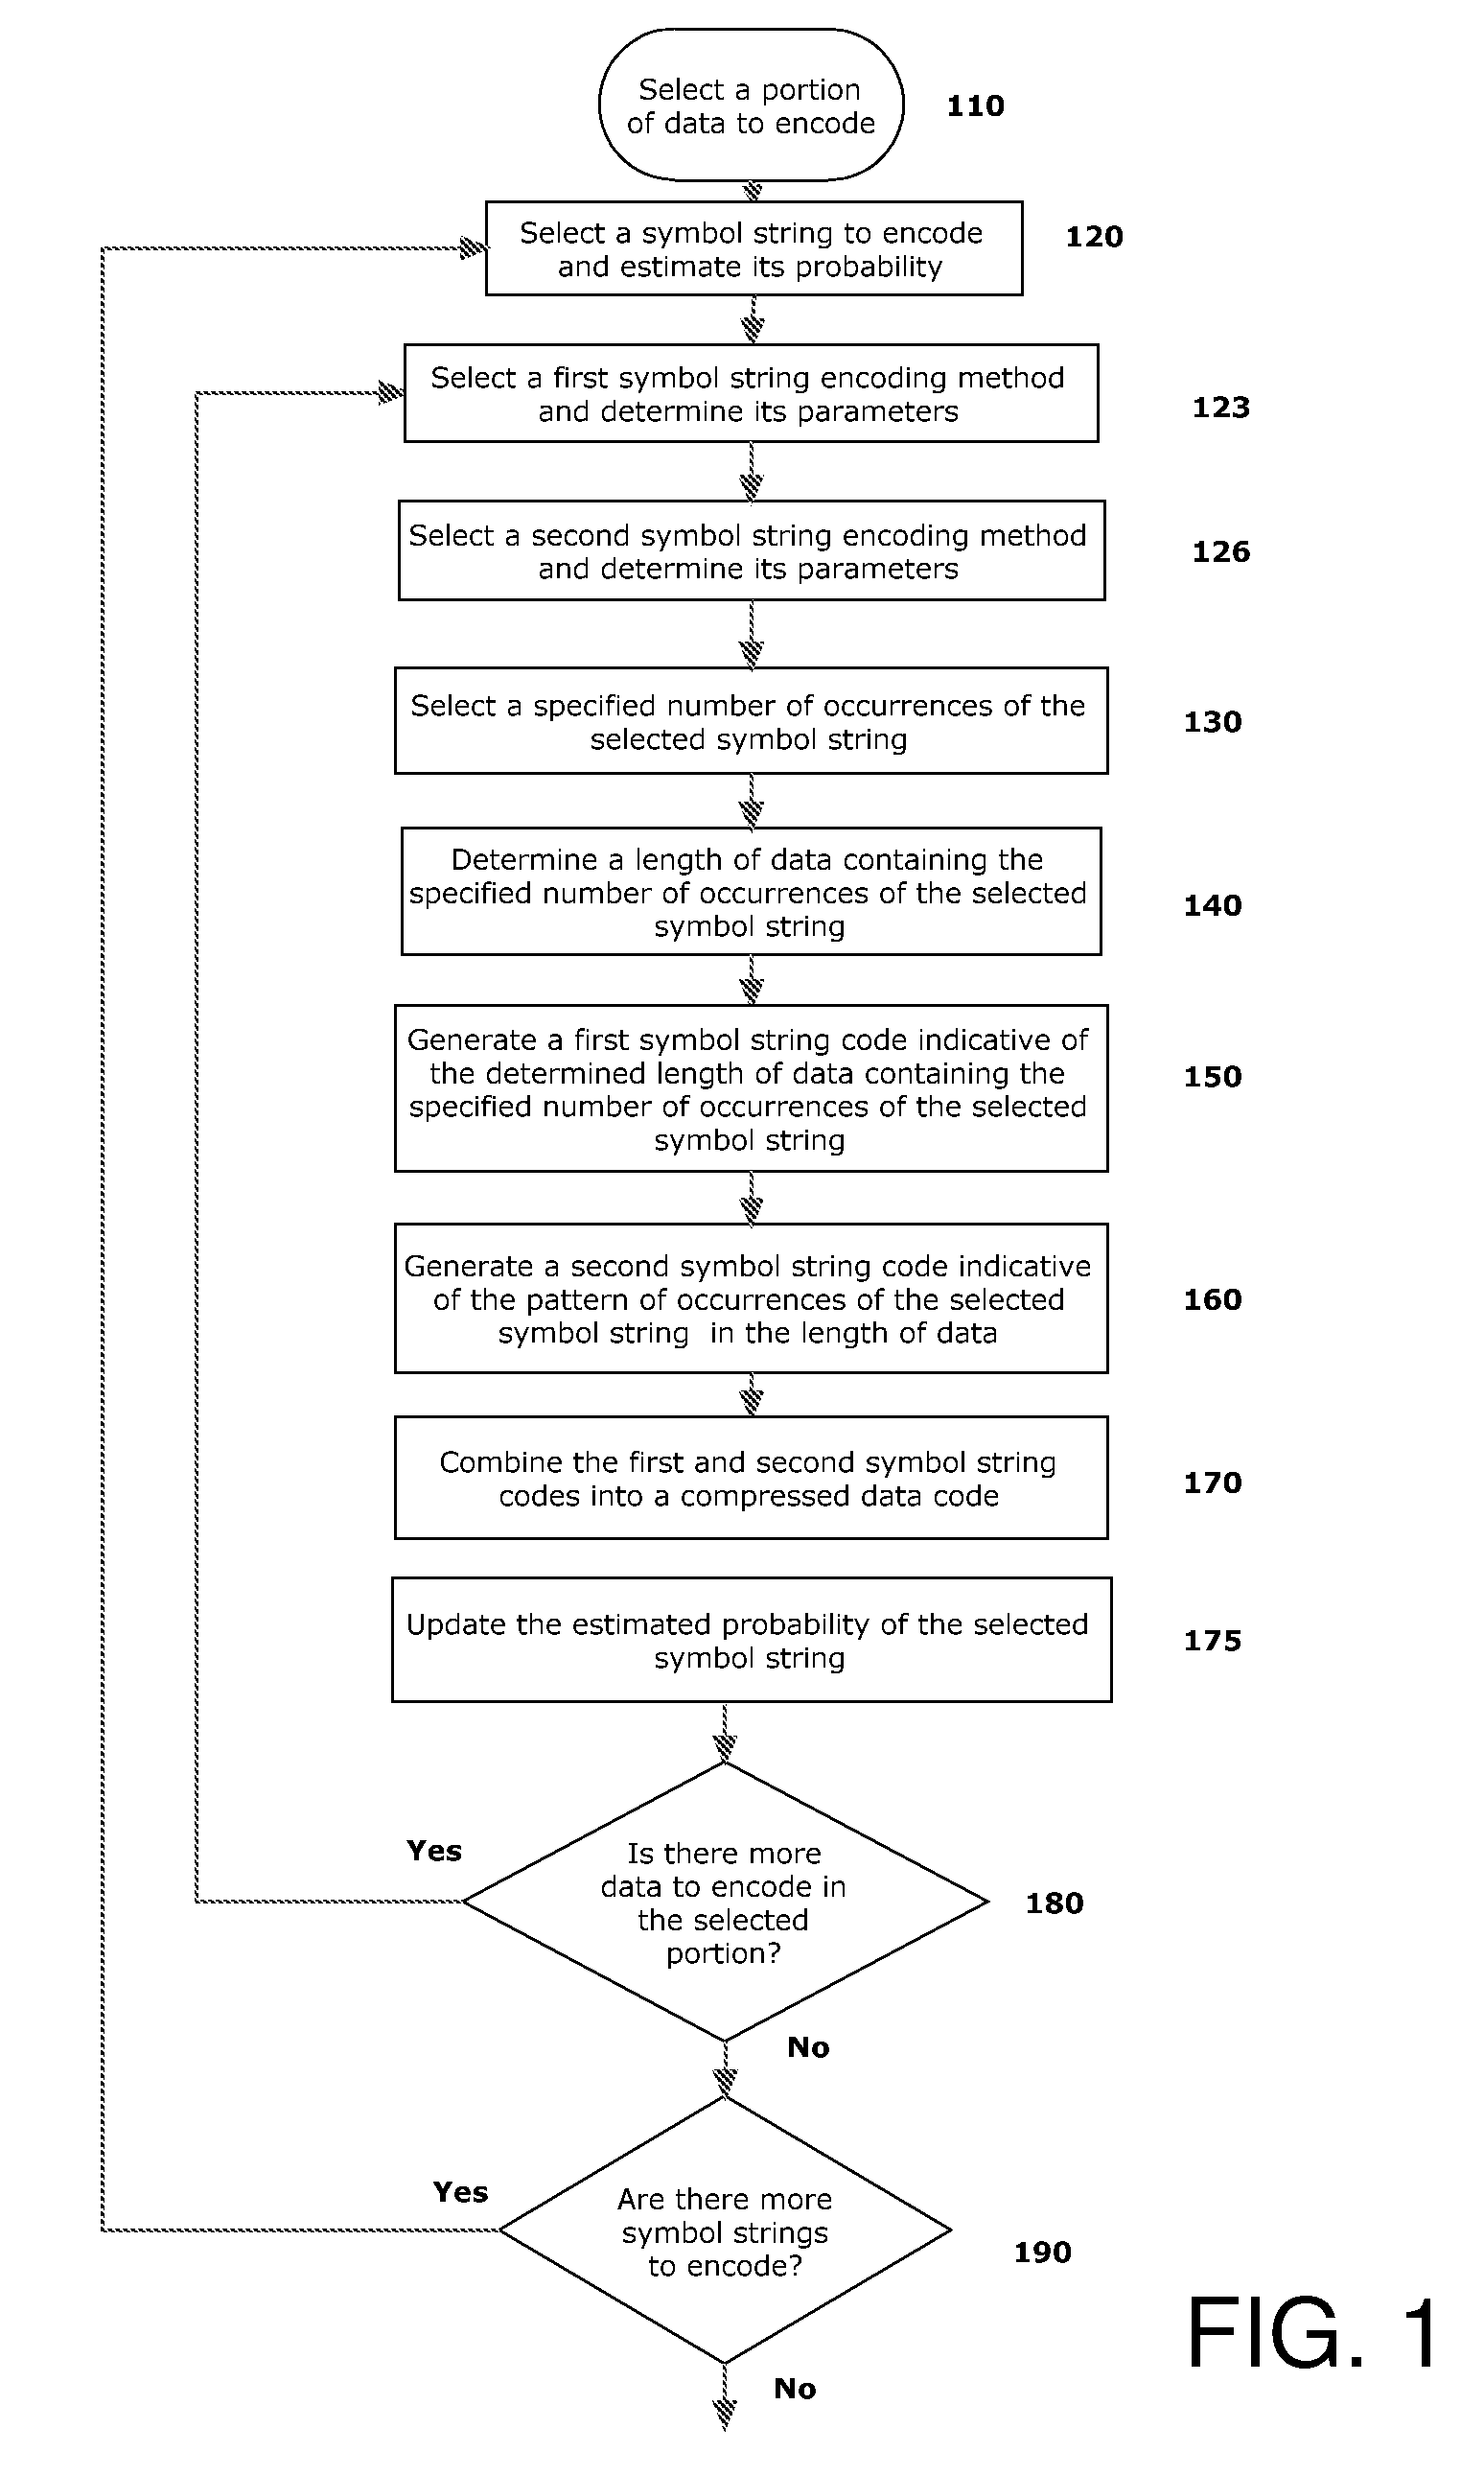 Adaptive combinatorial coding/decoding with specified occurrences for electrical computers and digital data processing systems